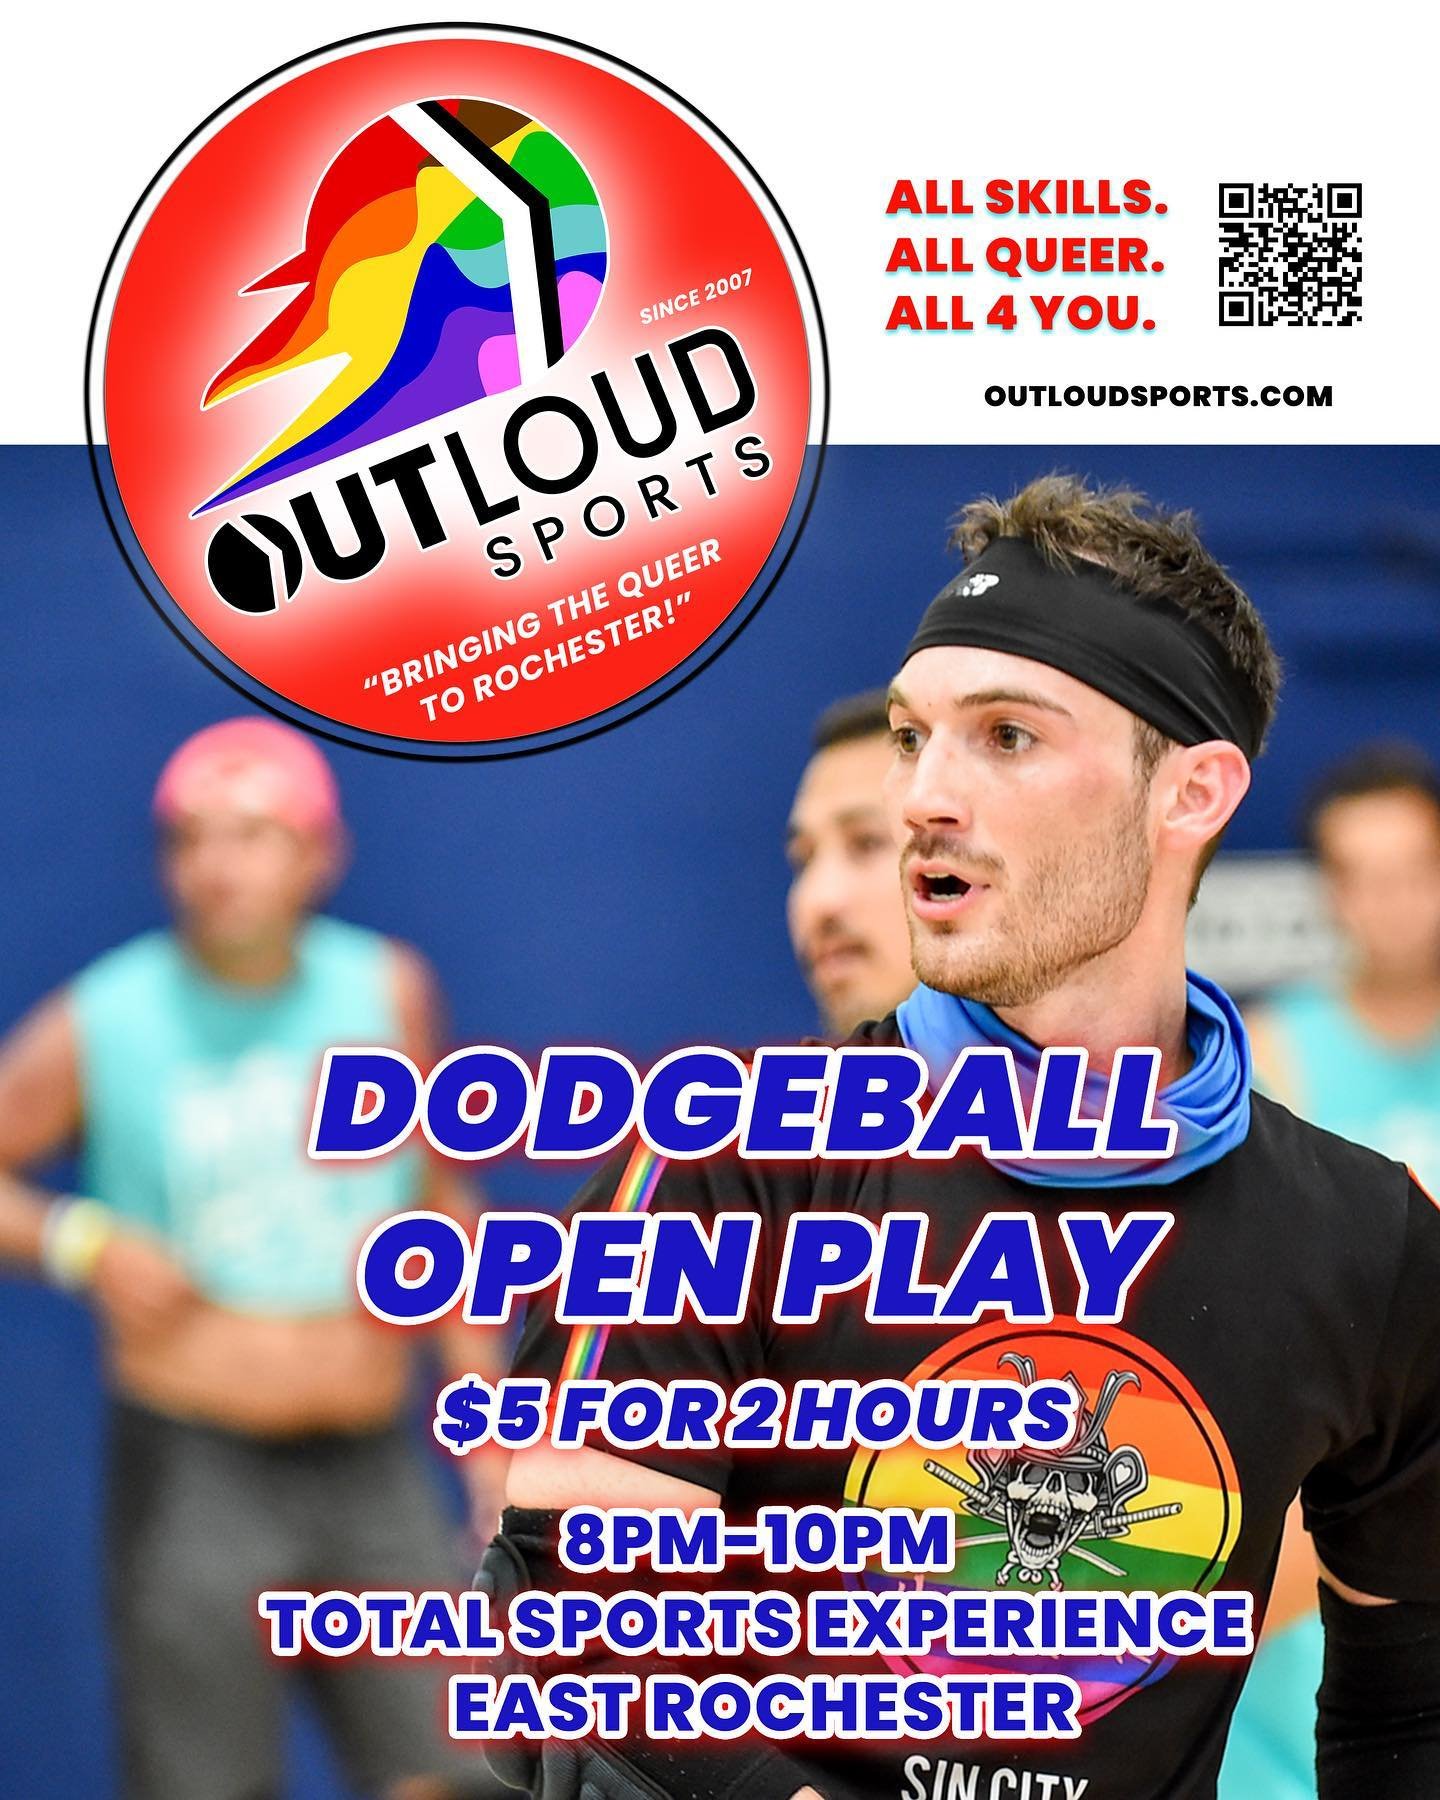 Bring your friends; bring your enemies - Come out for Dodgeball Open Play every Tuesday from 8-10 PM @ Total Sports Experience in E. Rochester. Cost is $5 for 2 hours of fun! 

#lgbt #lgbtsports #gayathlete #lgbtrochester #totalsportsexperience #dodg